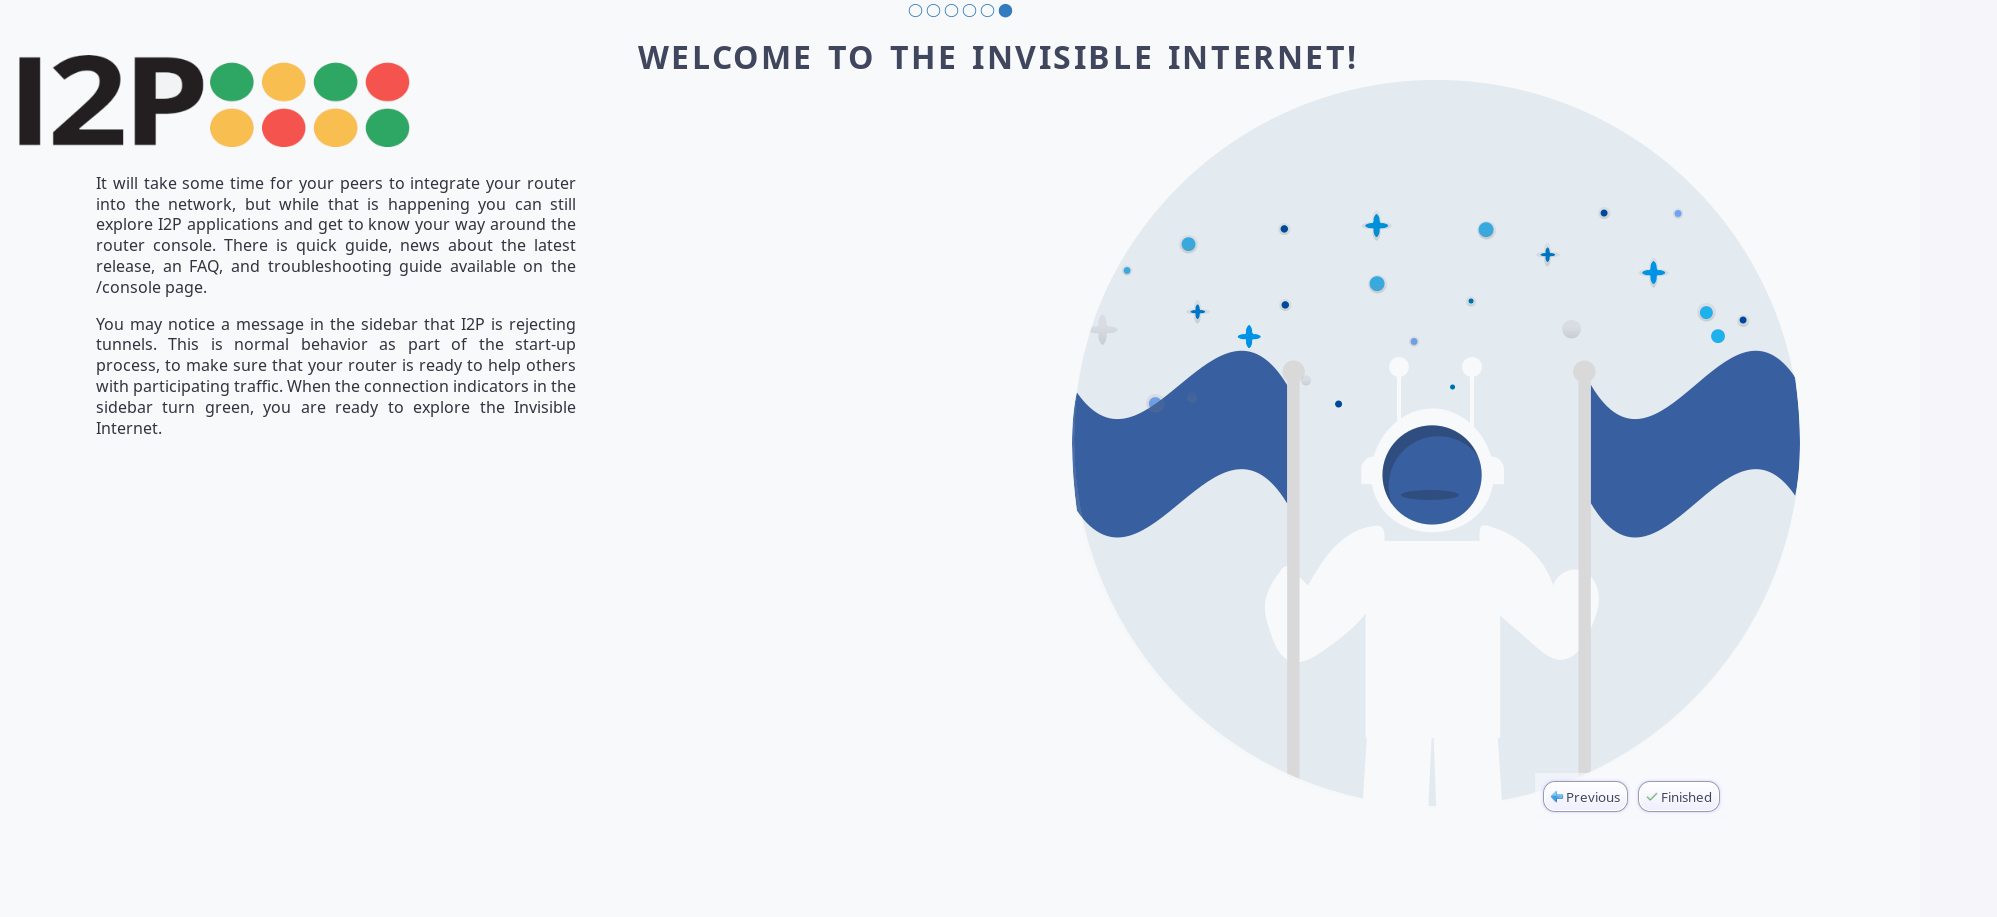 Welcome to the Invisible Internet